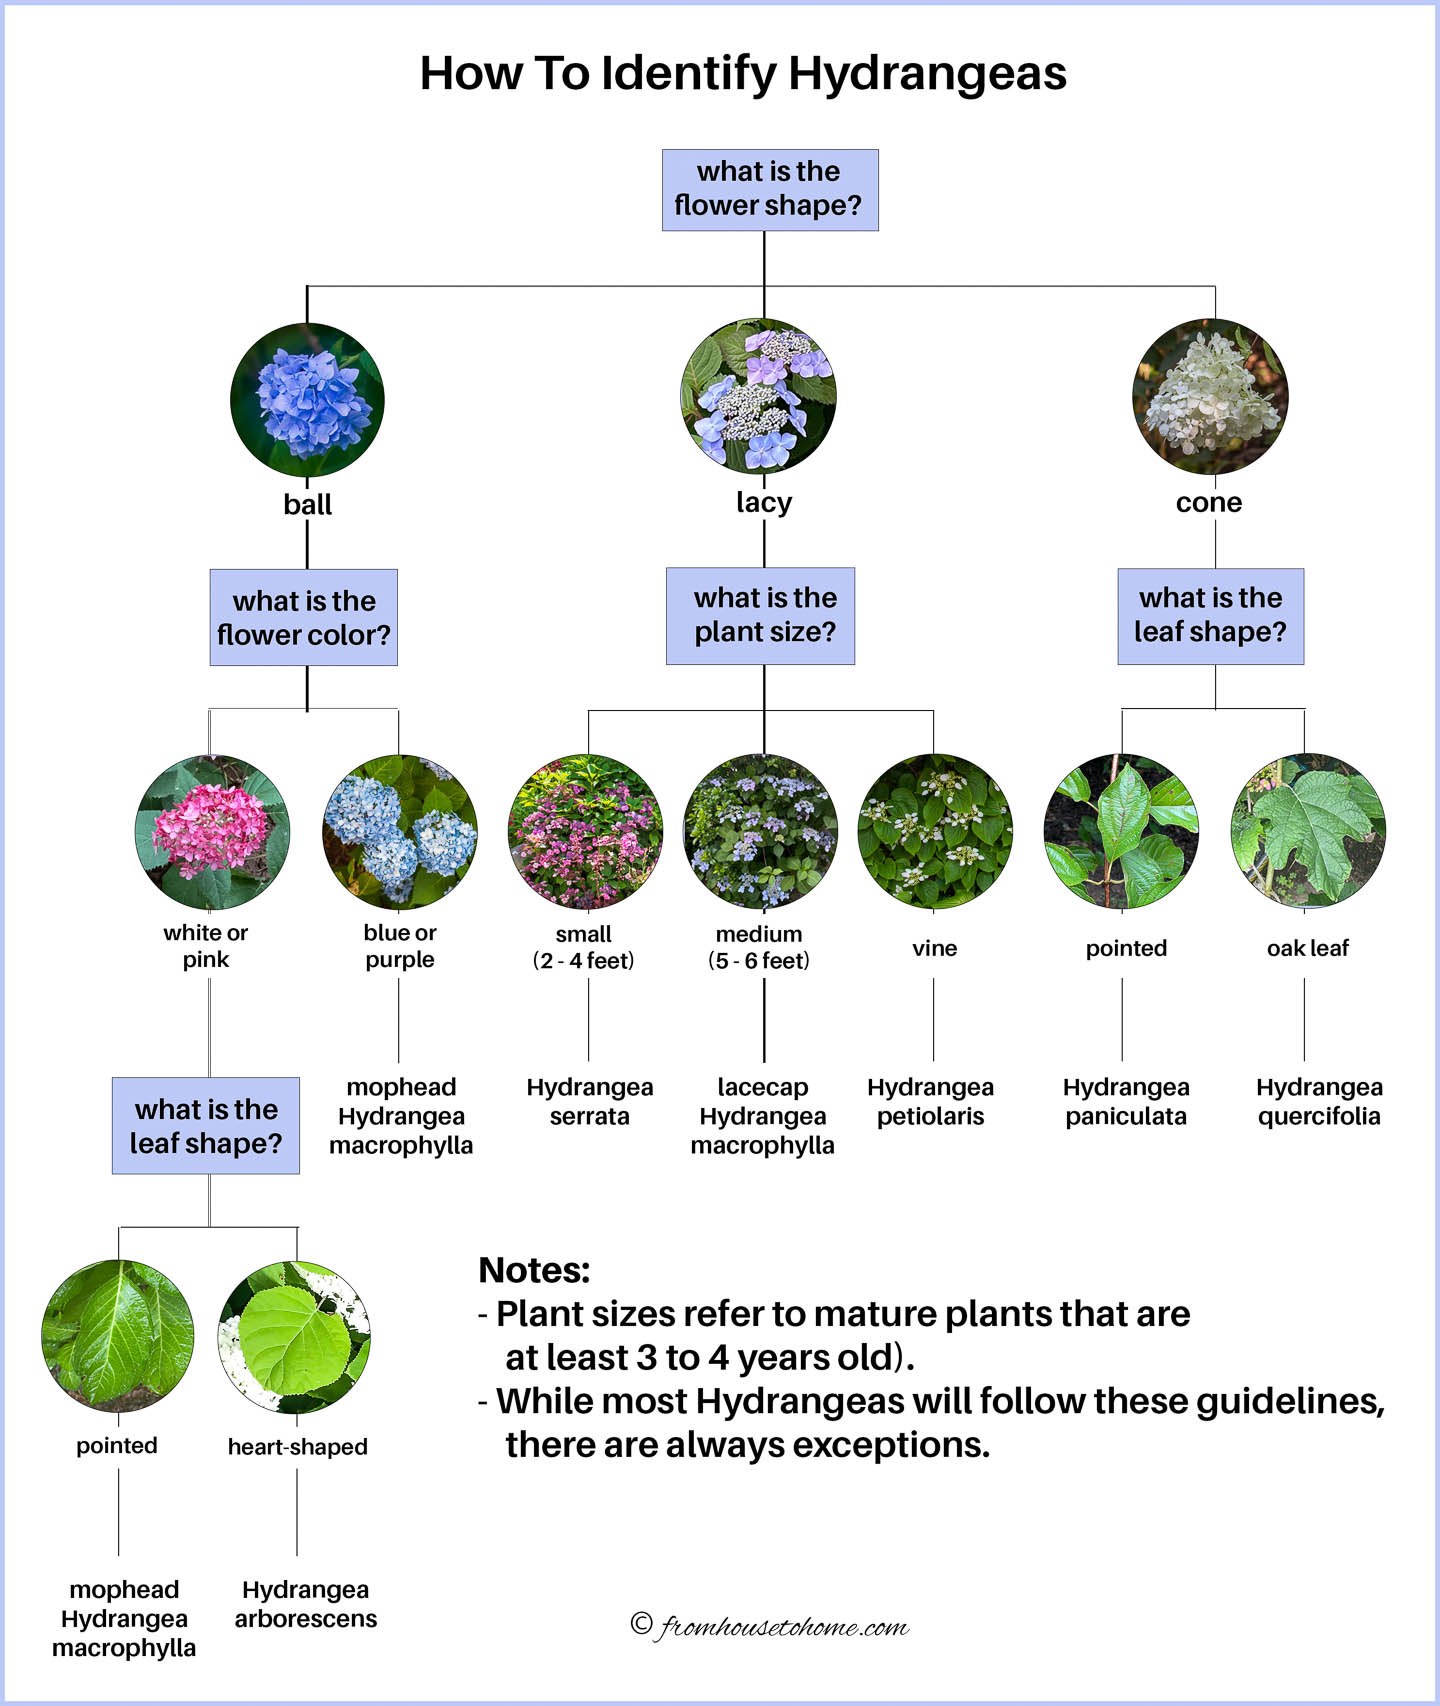 Decision tree for identifying different types of Hydrangeas